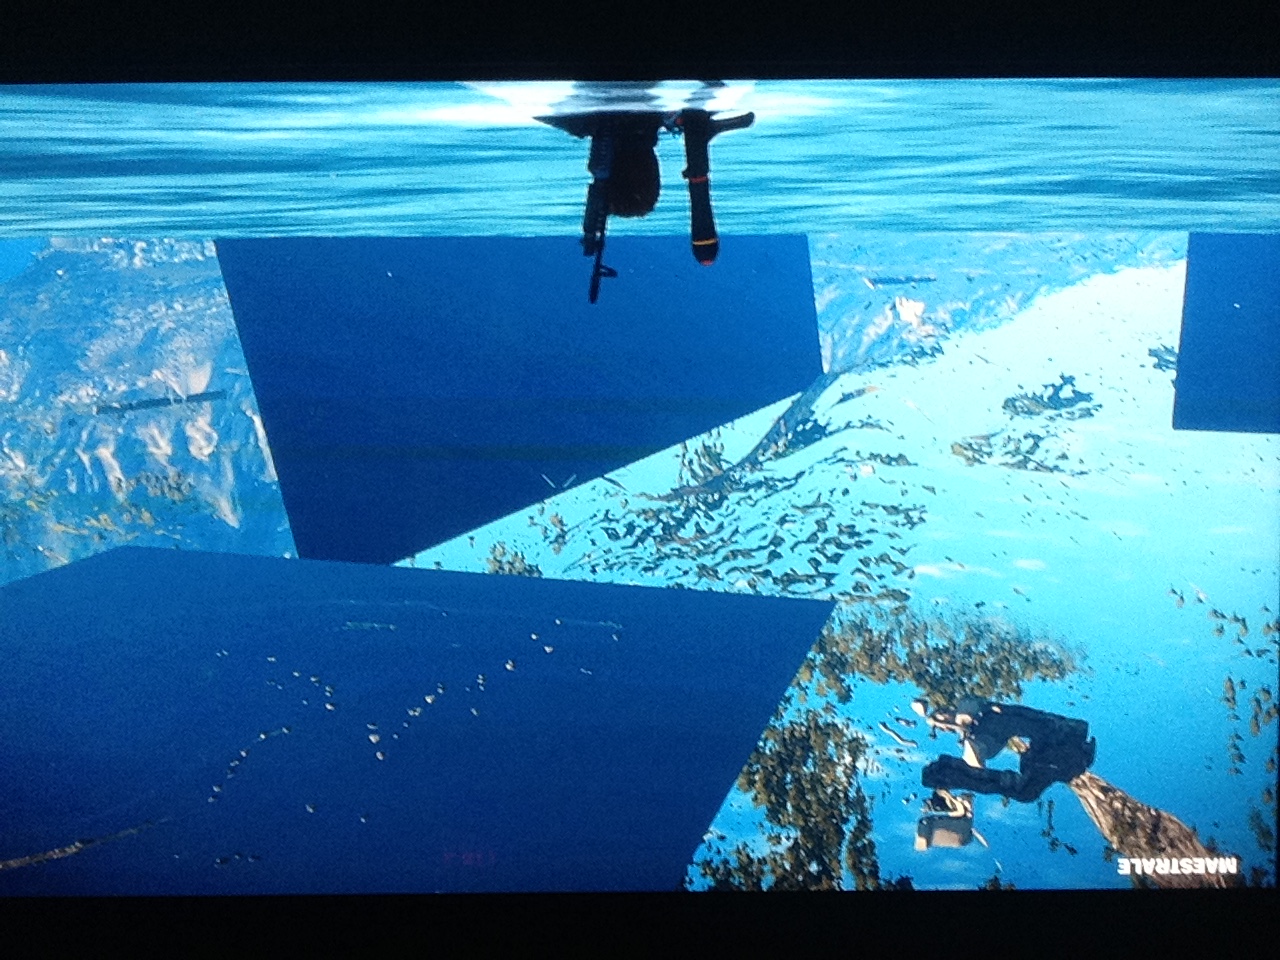 just cause 3 for pc freezing